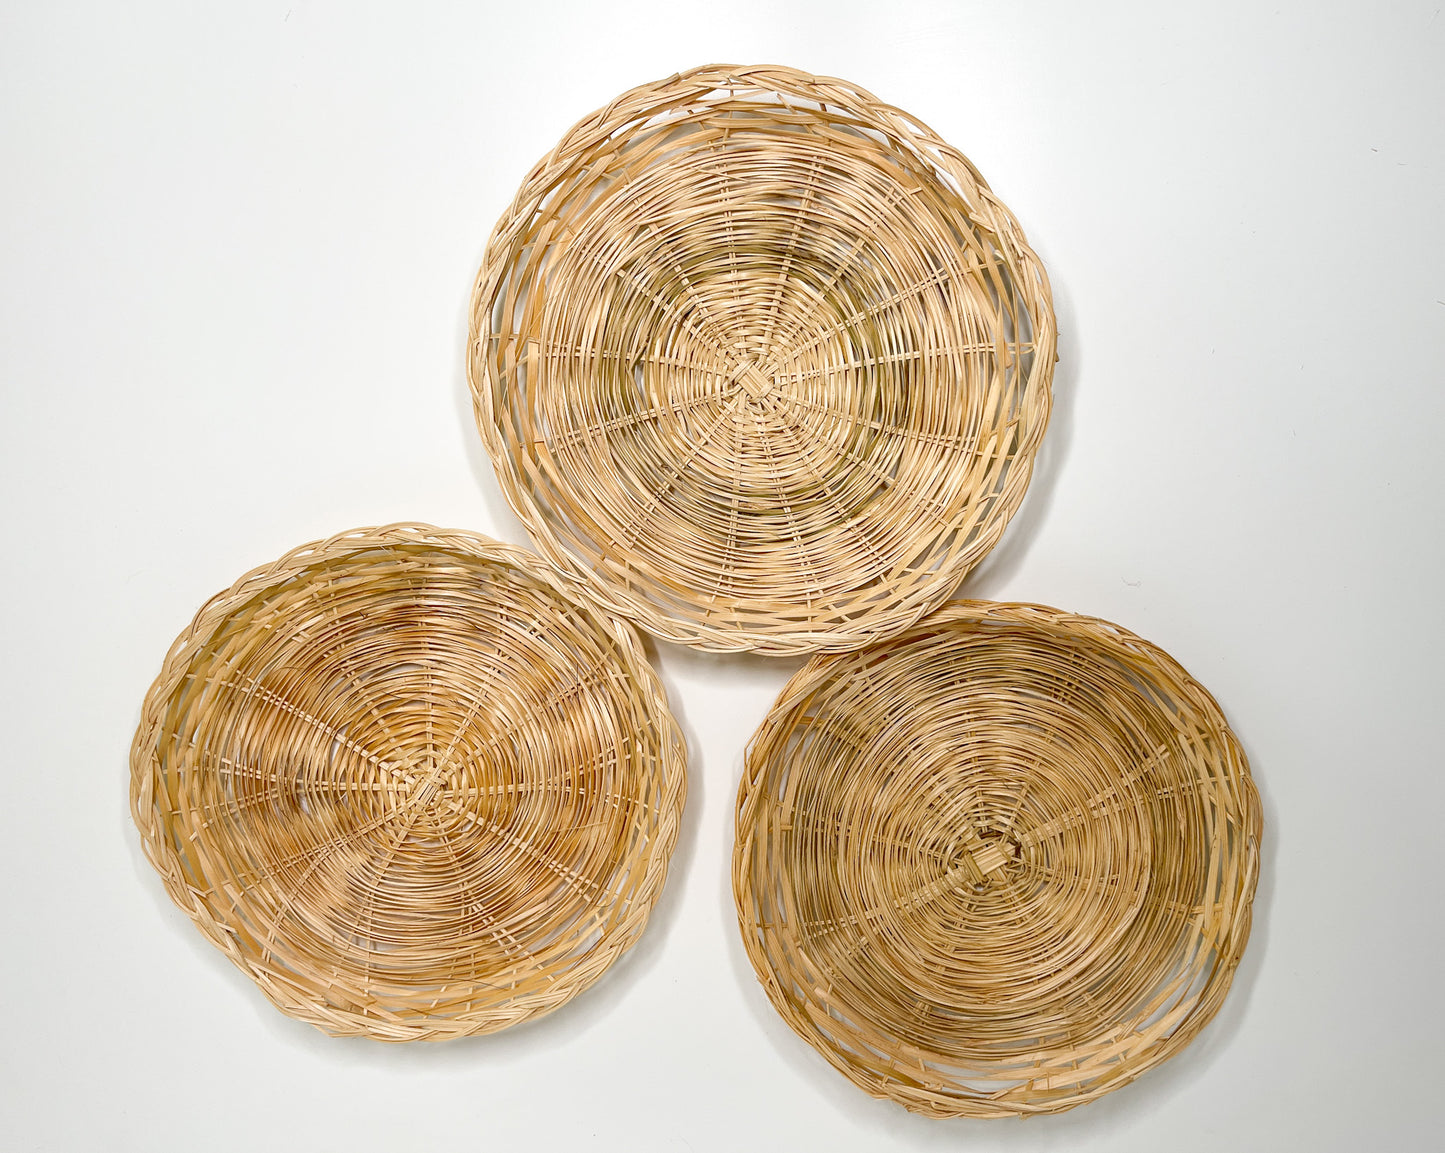 Curated Lot of 3 Vintage Wicker Plate/Chargers | Vintage Wicker Plates | Collectible Wicker Plates